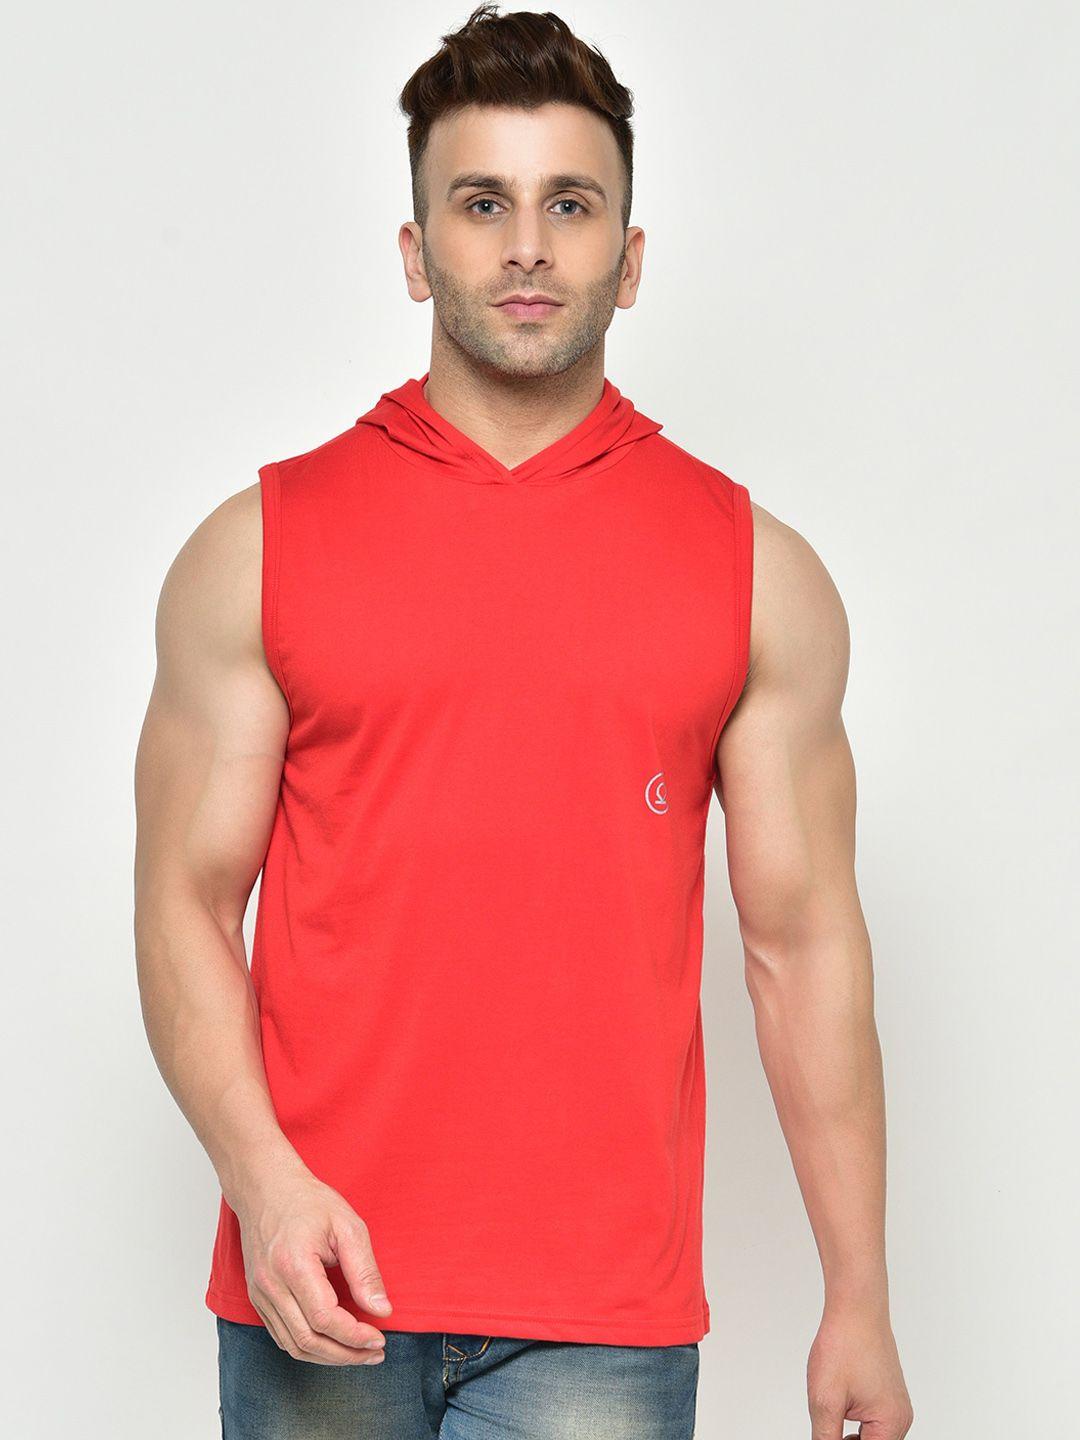 chkokko men red solid hood dry fit gym t-shirt